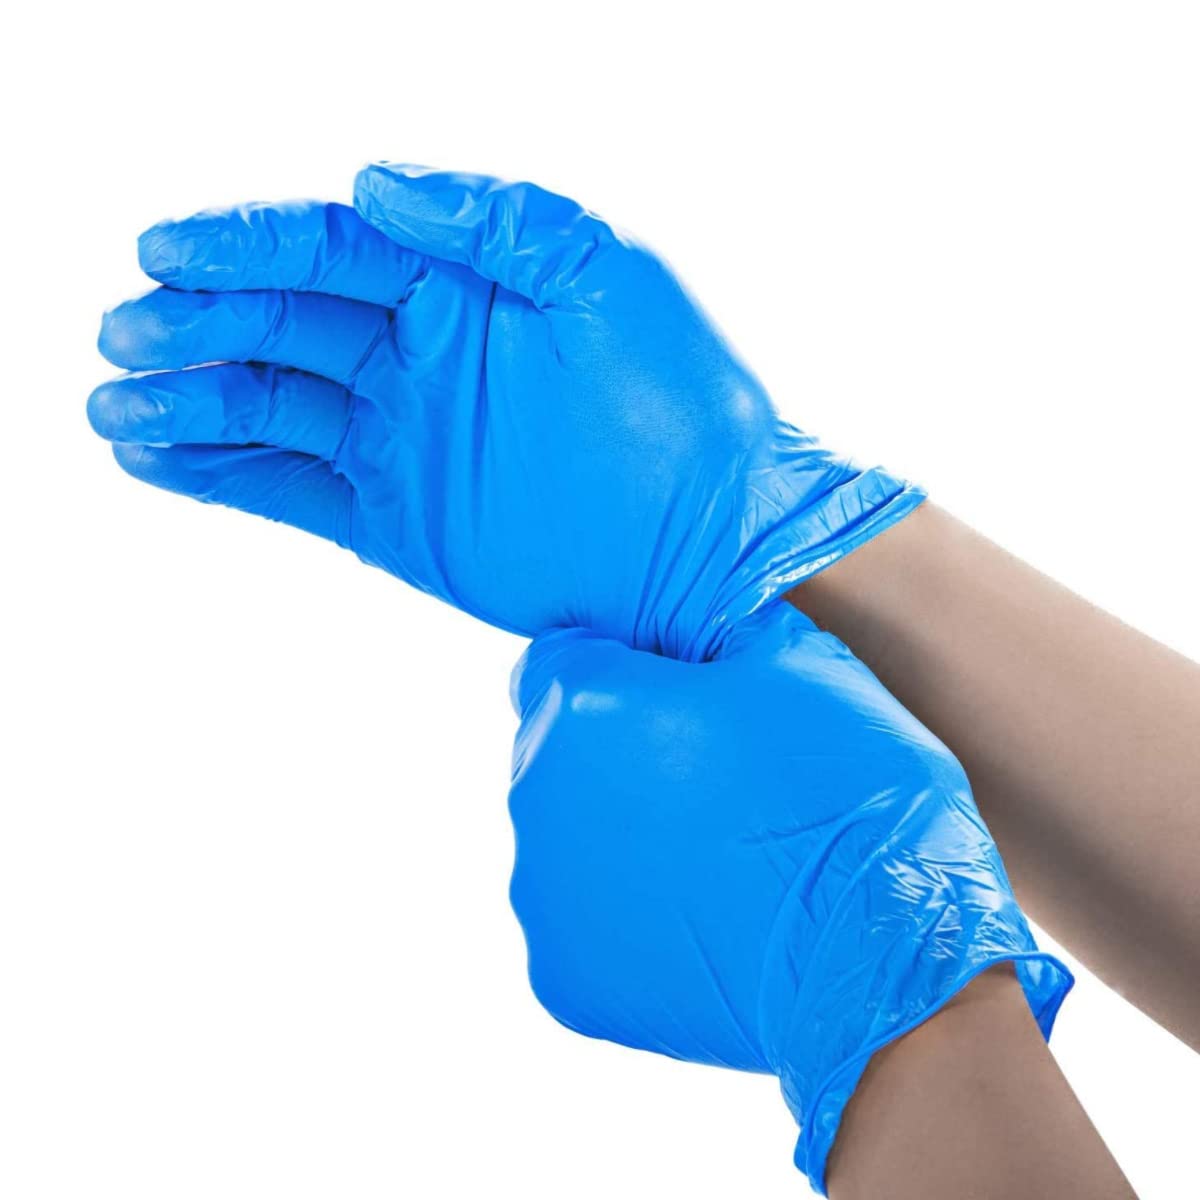 Jointown Basic Medical Synmax Vinyl Exam Gloves - Latex-Free & Powder-Free - X-Large, BMPF-3004 Blue Box of 100